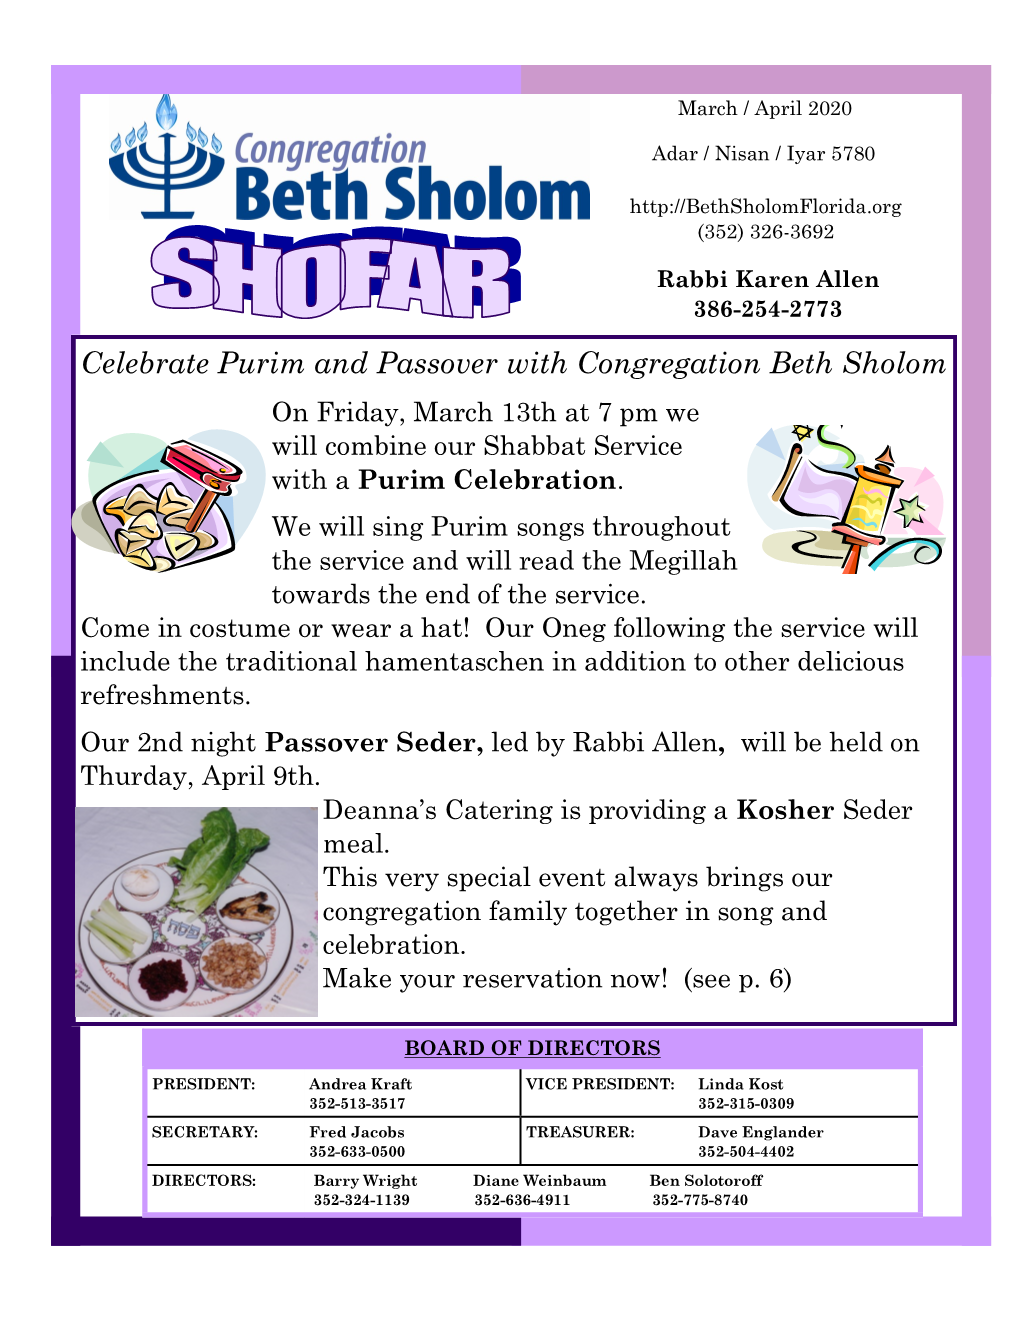 Celebrate Purim and Passover with Congregation Beth Sholom on Friday, March 13Th at 7 Pm We Will Combine Our Shabbat Service with a Purim Celebration